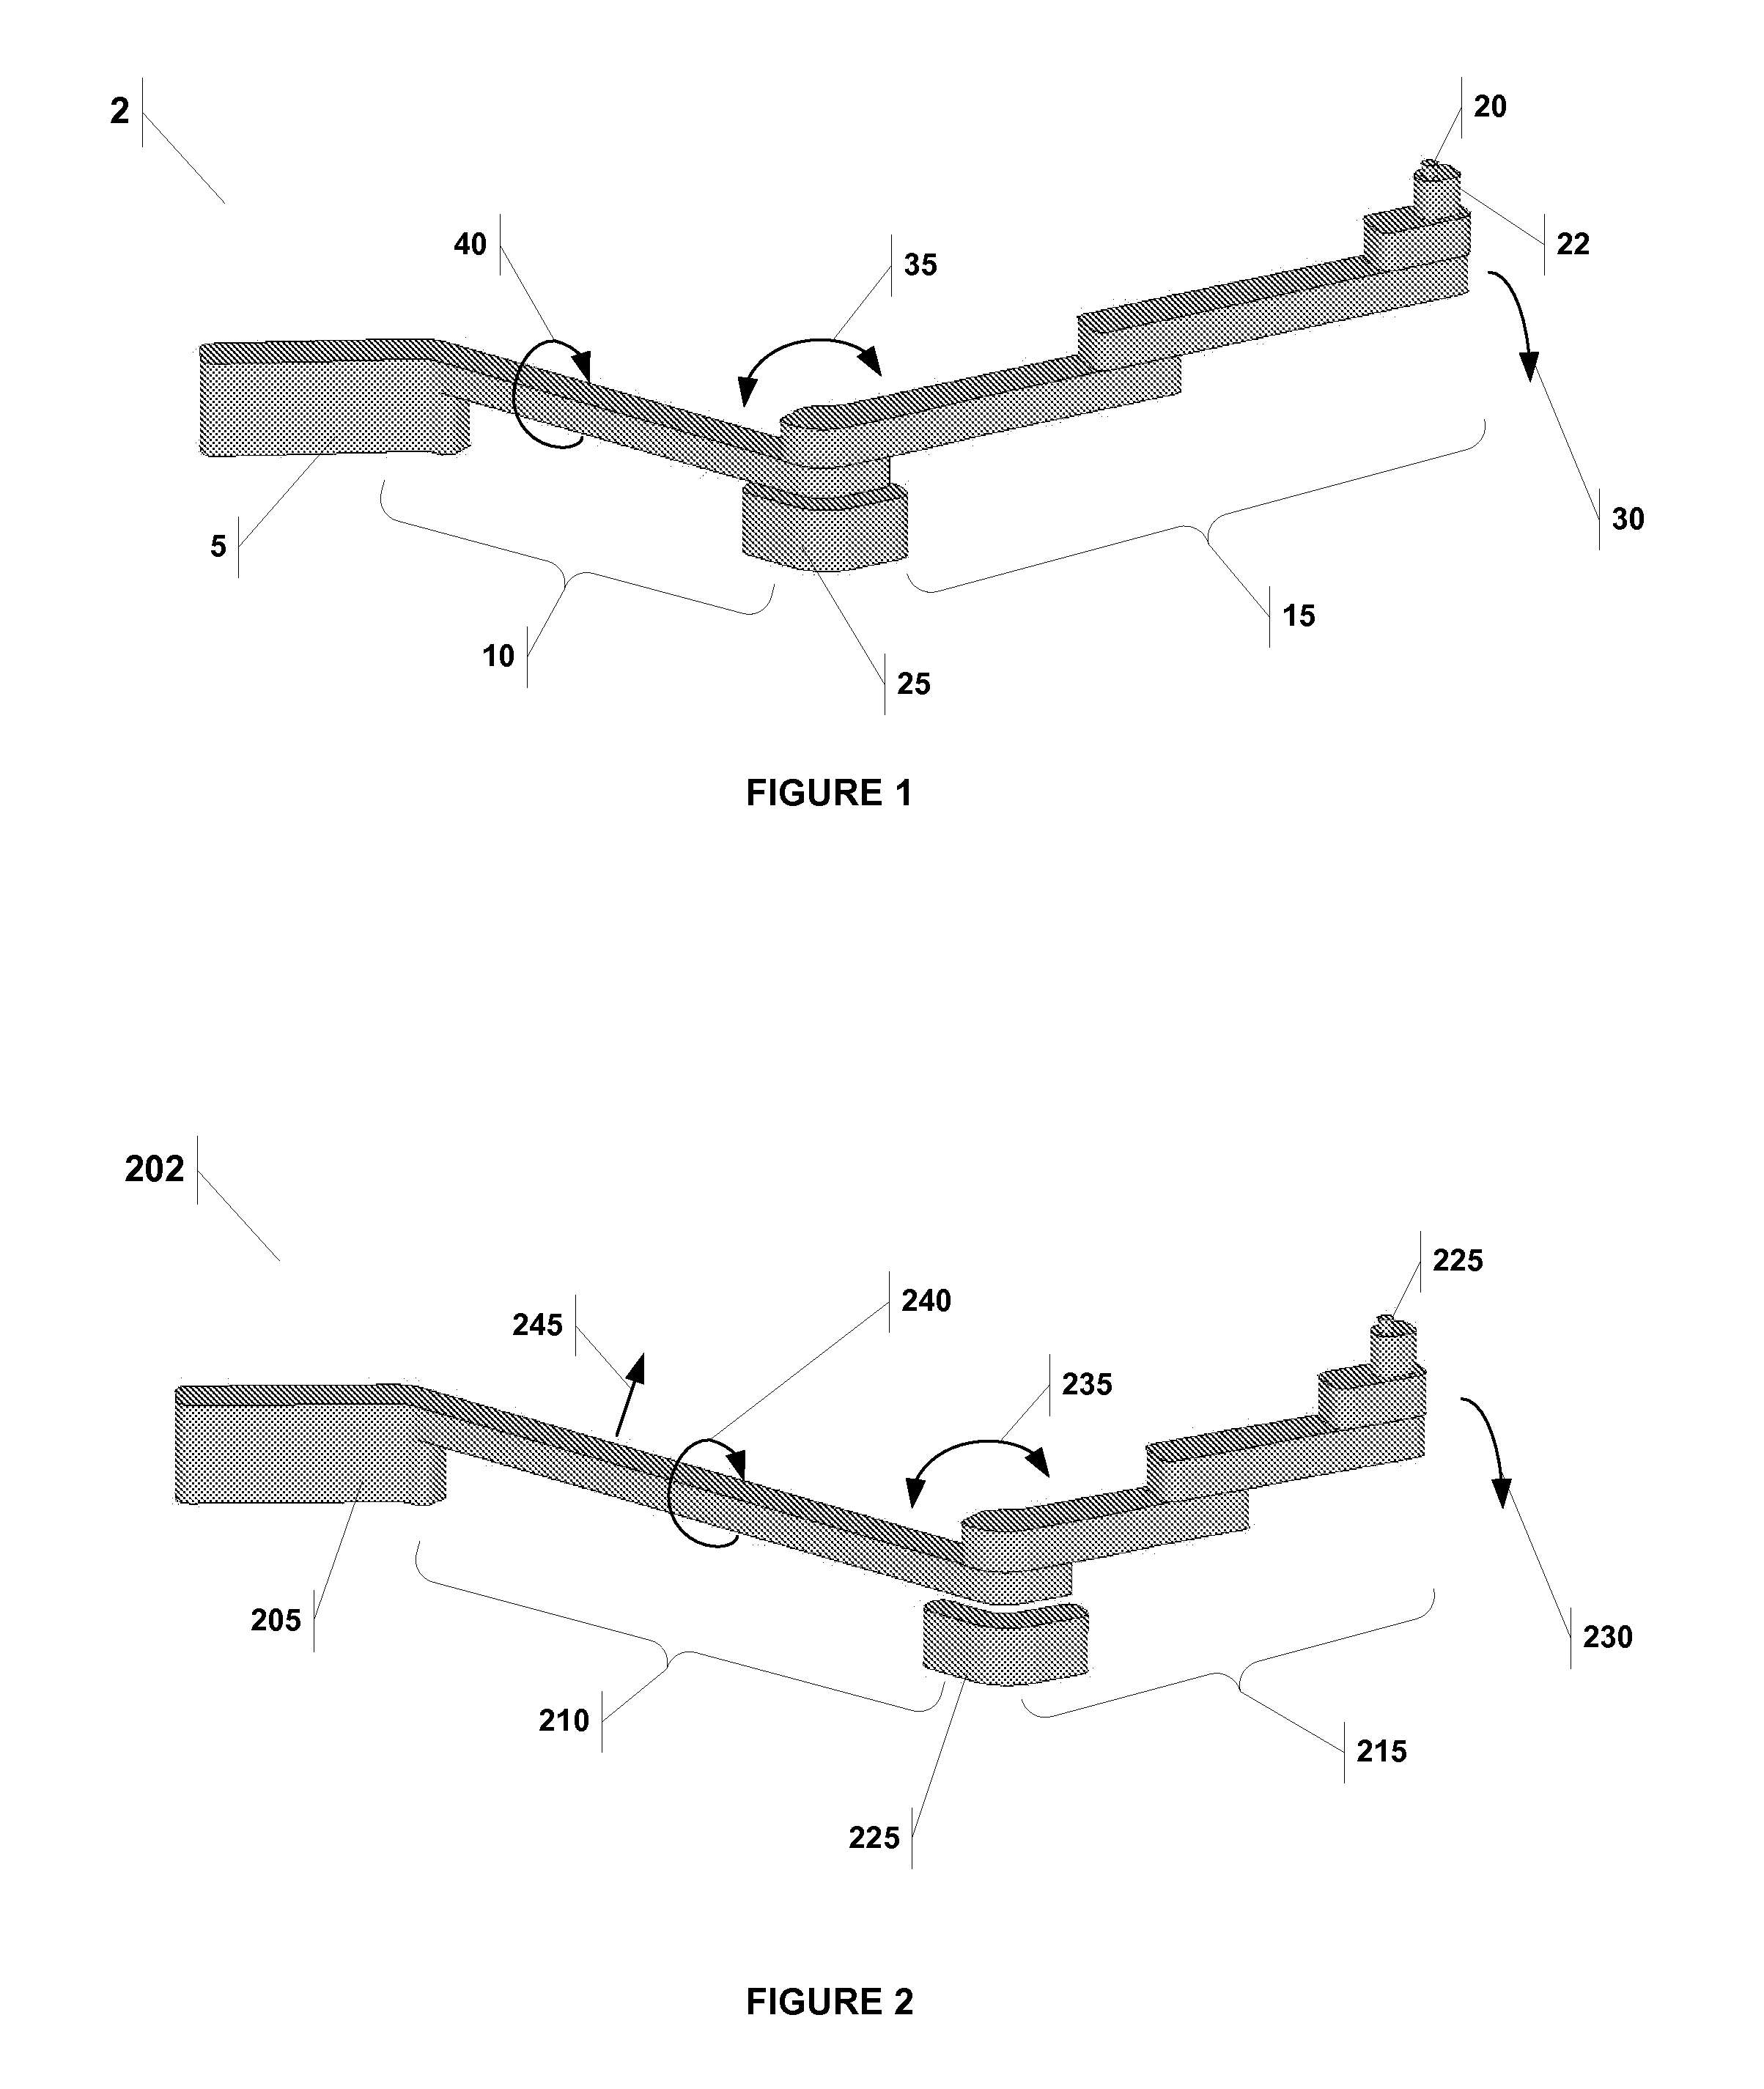 Probe for testing semiconductor devices